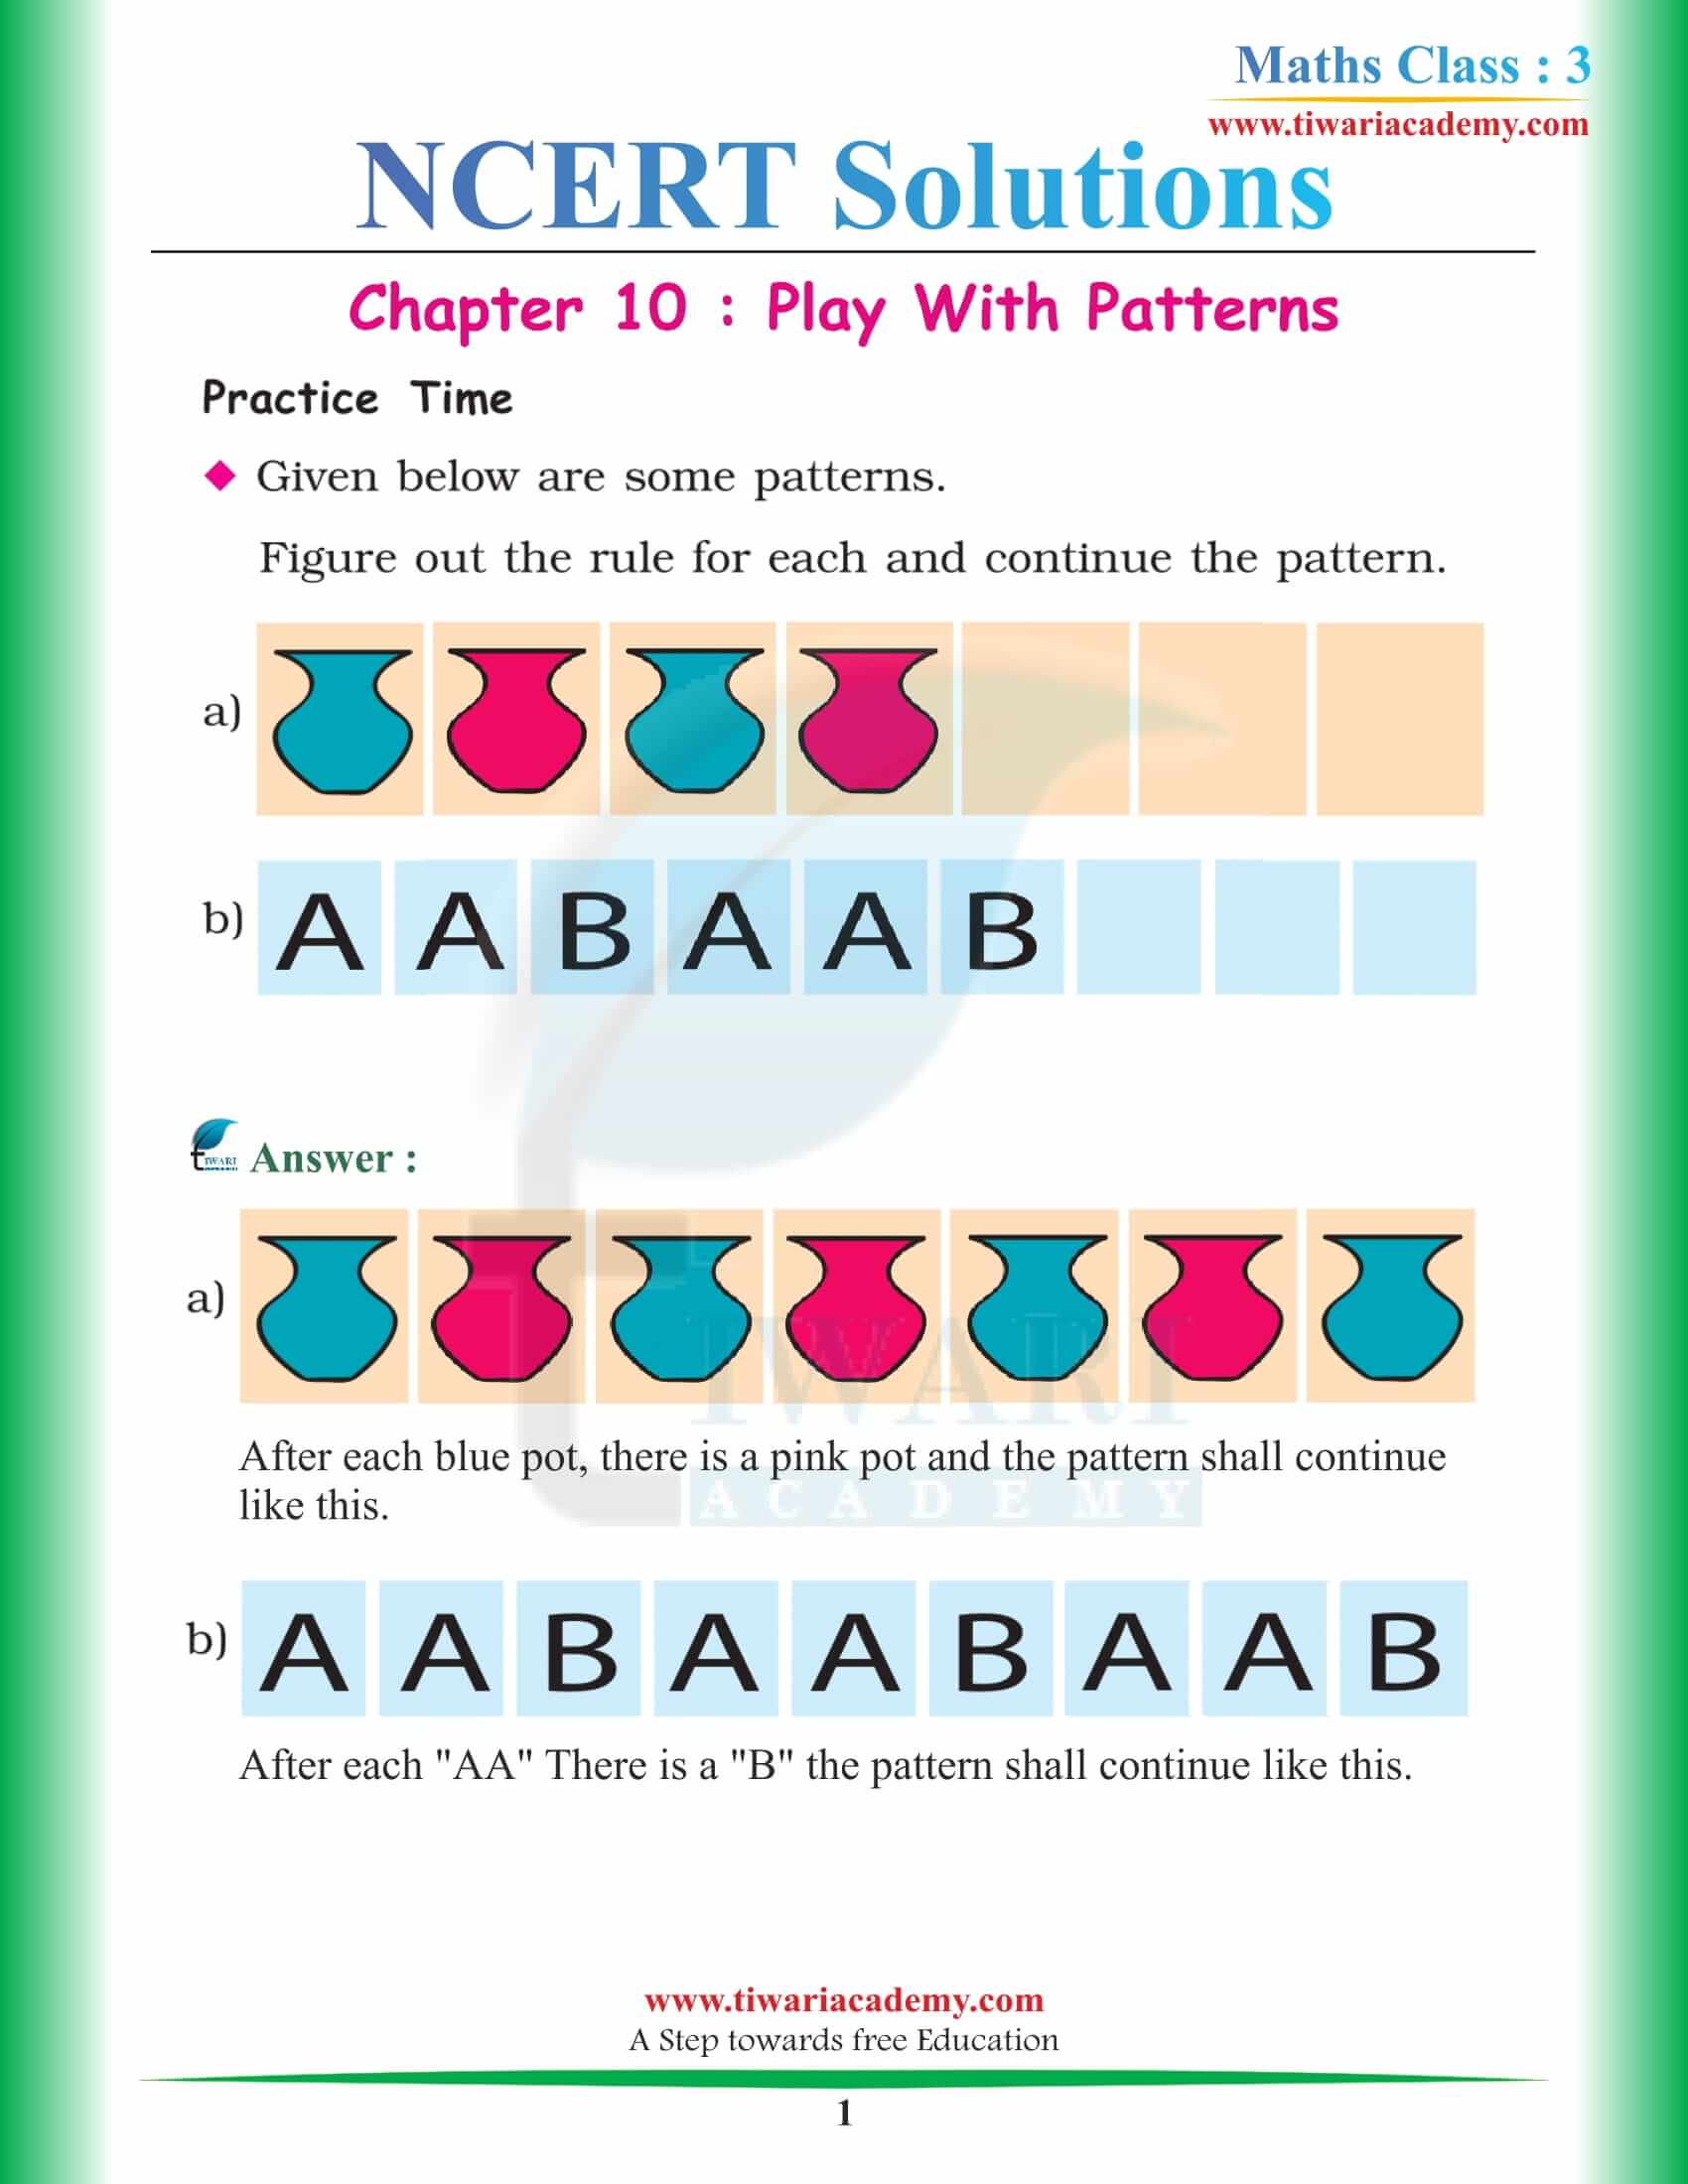 NCERT Solutions for Class 3 Maths Chapter 10 Play with Patterns